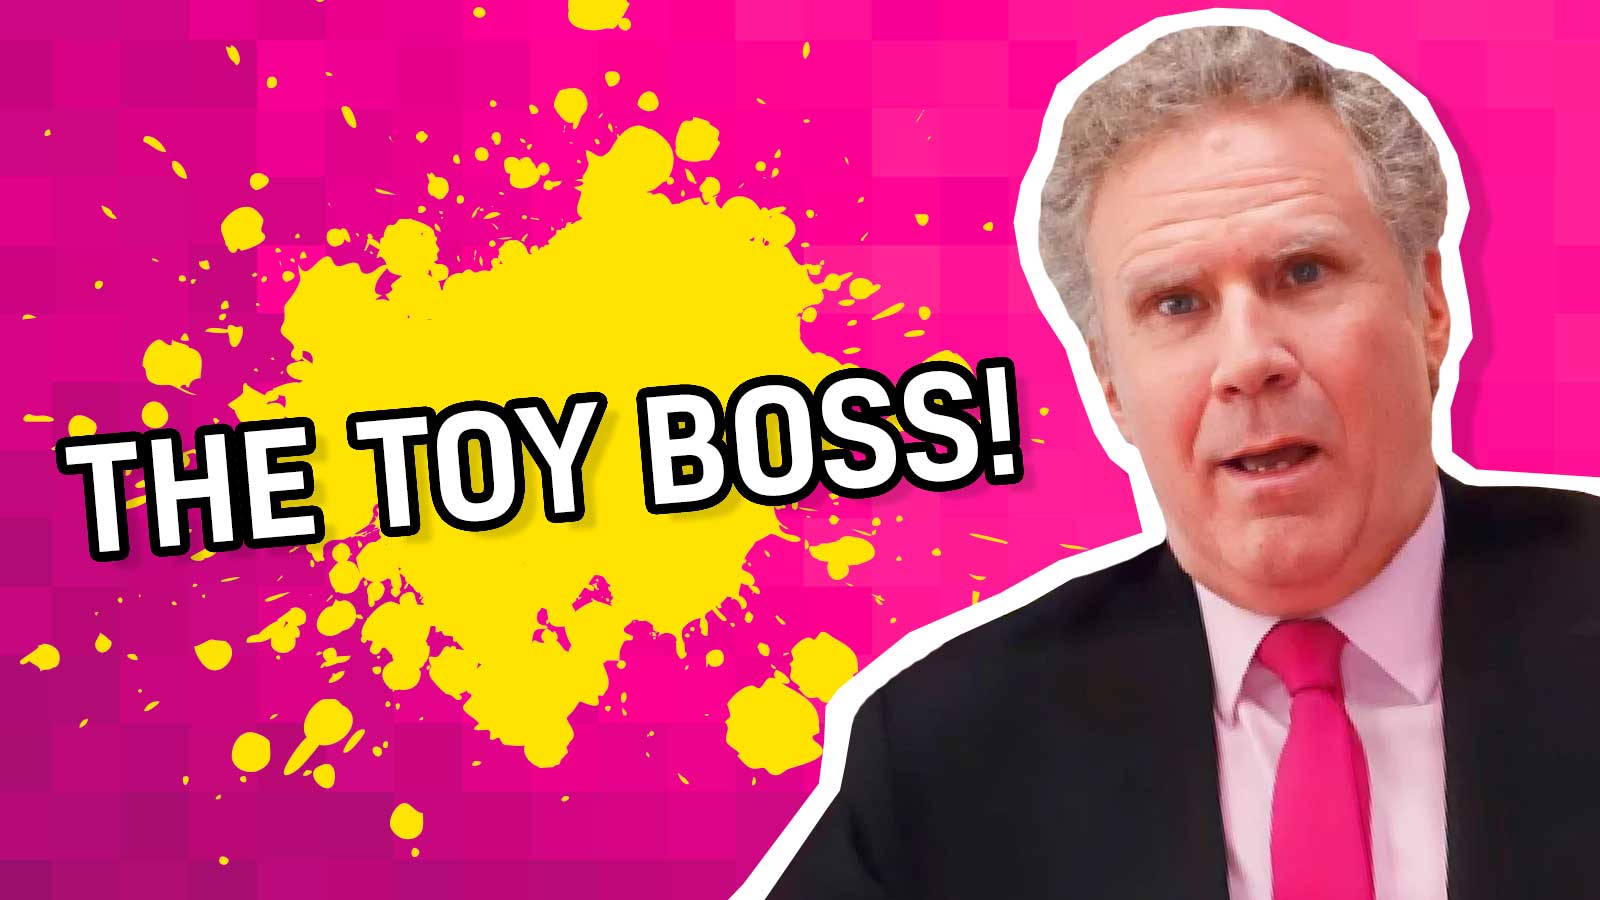 Result: The Toy Boss